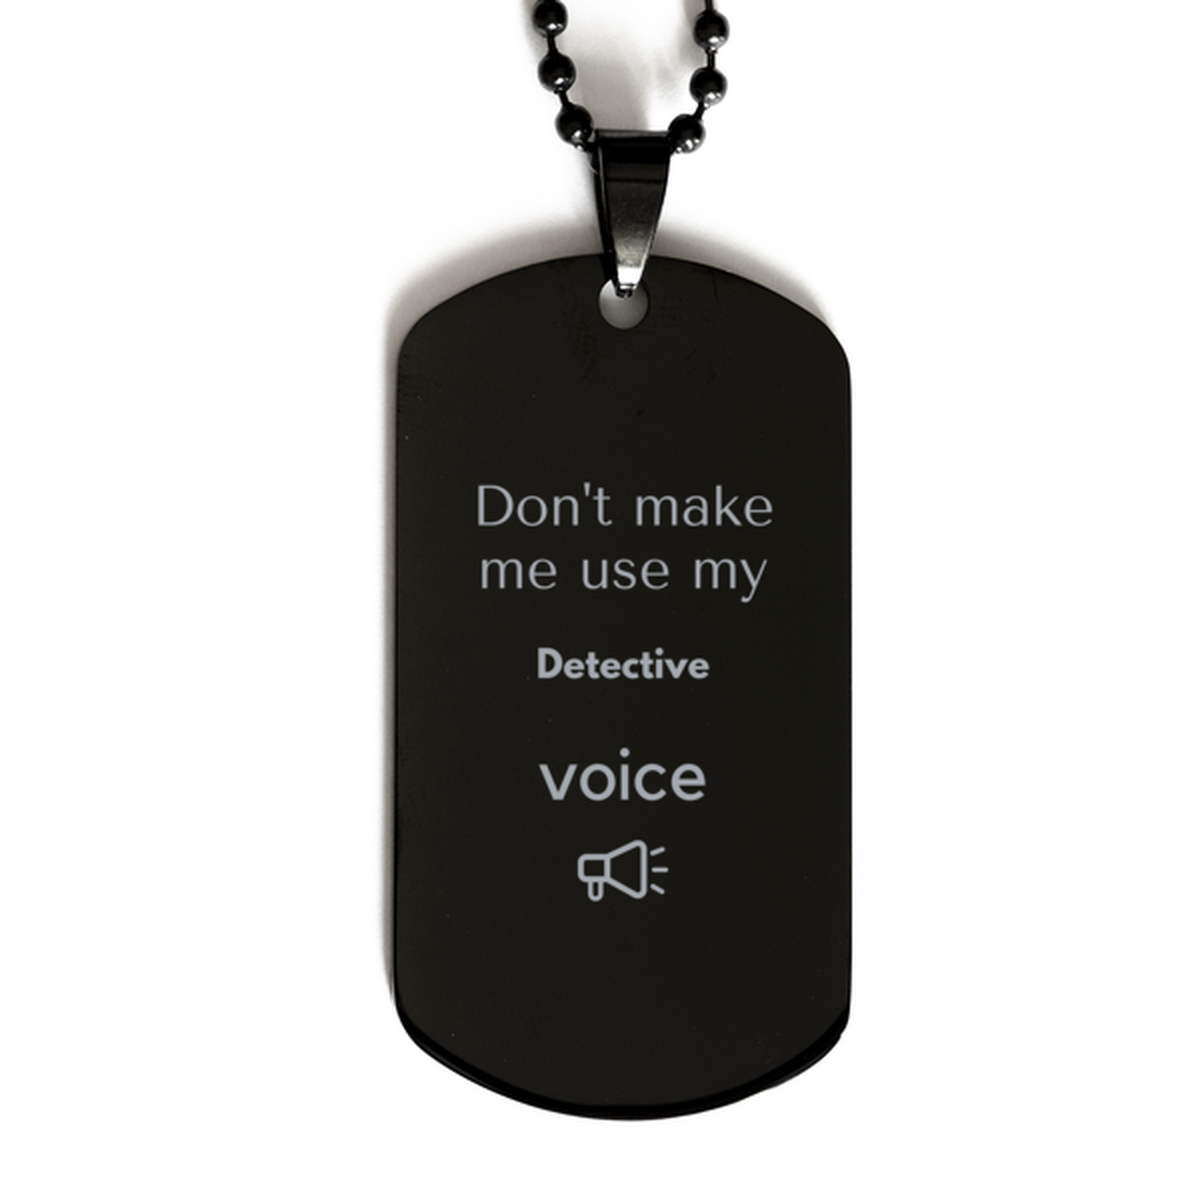 Don't make me use my Detective voice, Sarcasm Detective Gifts, Christmas Detective Black Dog Tag Birthday Unique Gifts For Detective Coworkers, Men, Women, Colleague, Friends